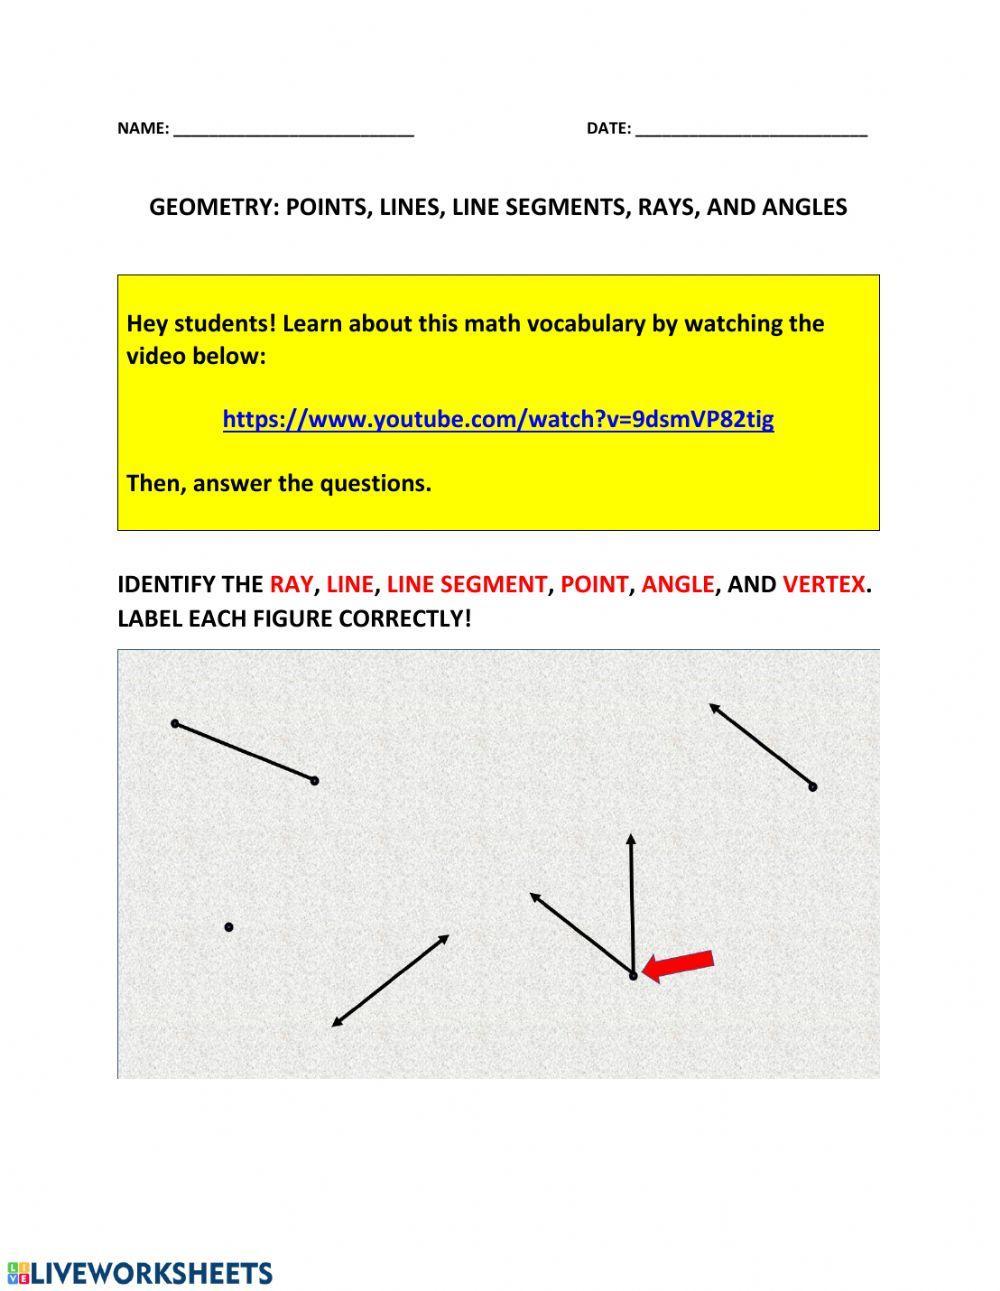 Geometry: points, lines, line segments, rays, and angles